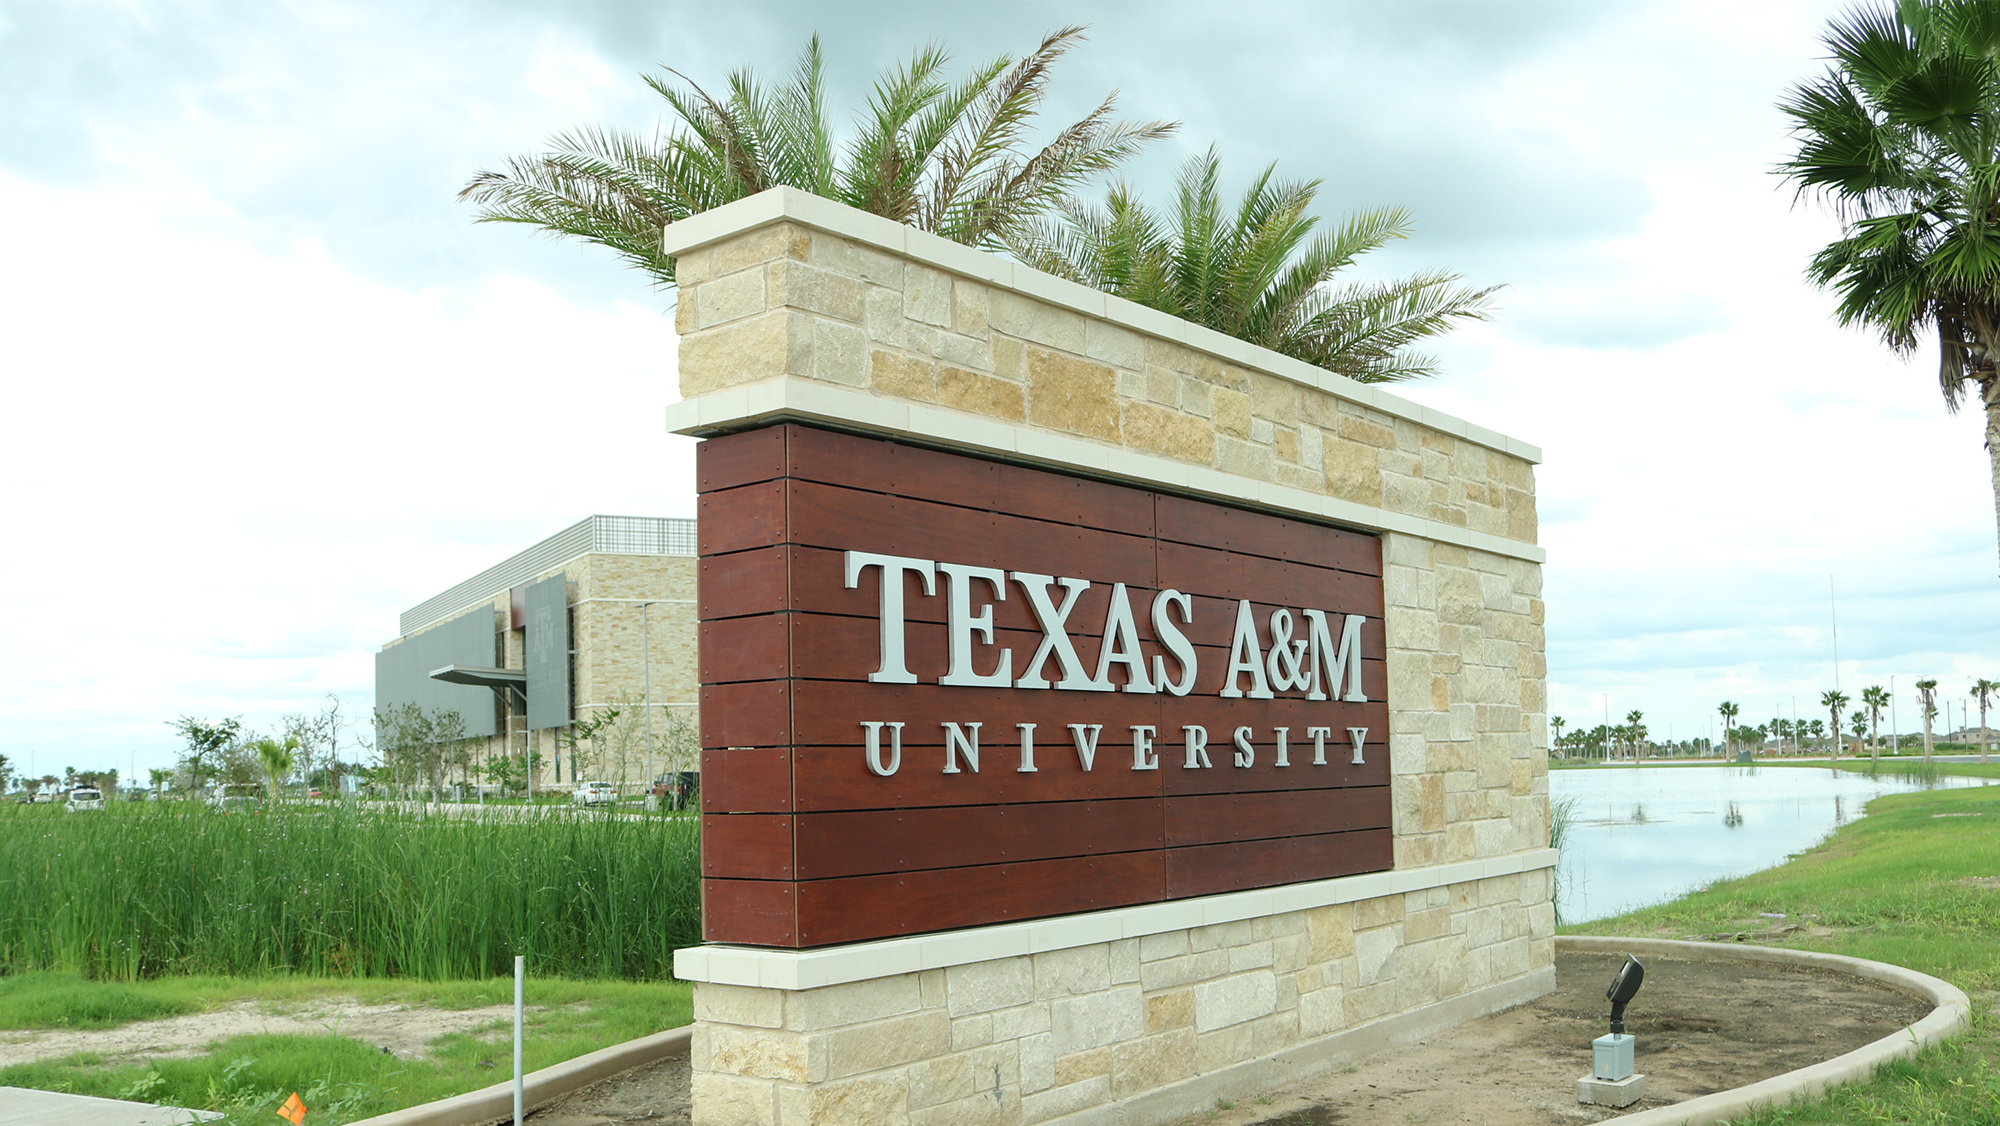 Contact | Texas A&M University Engineering2000 x 1126